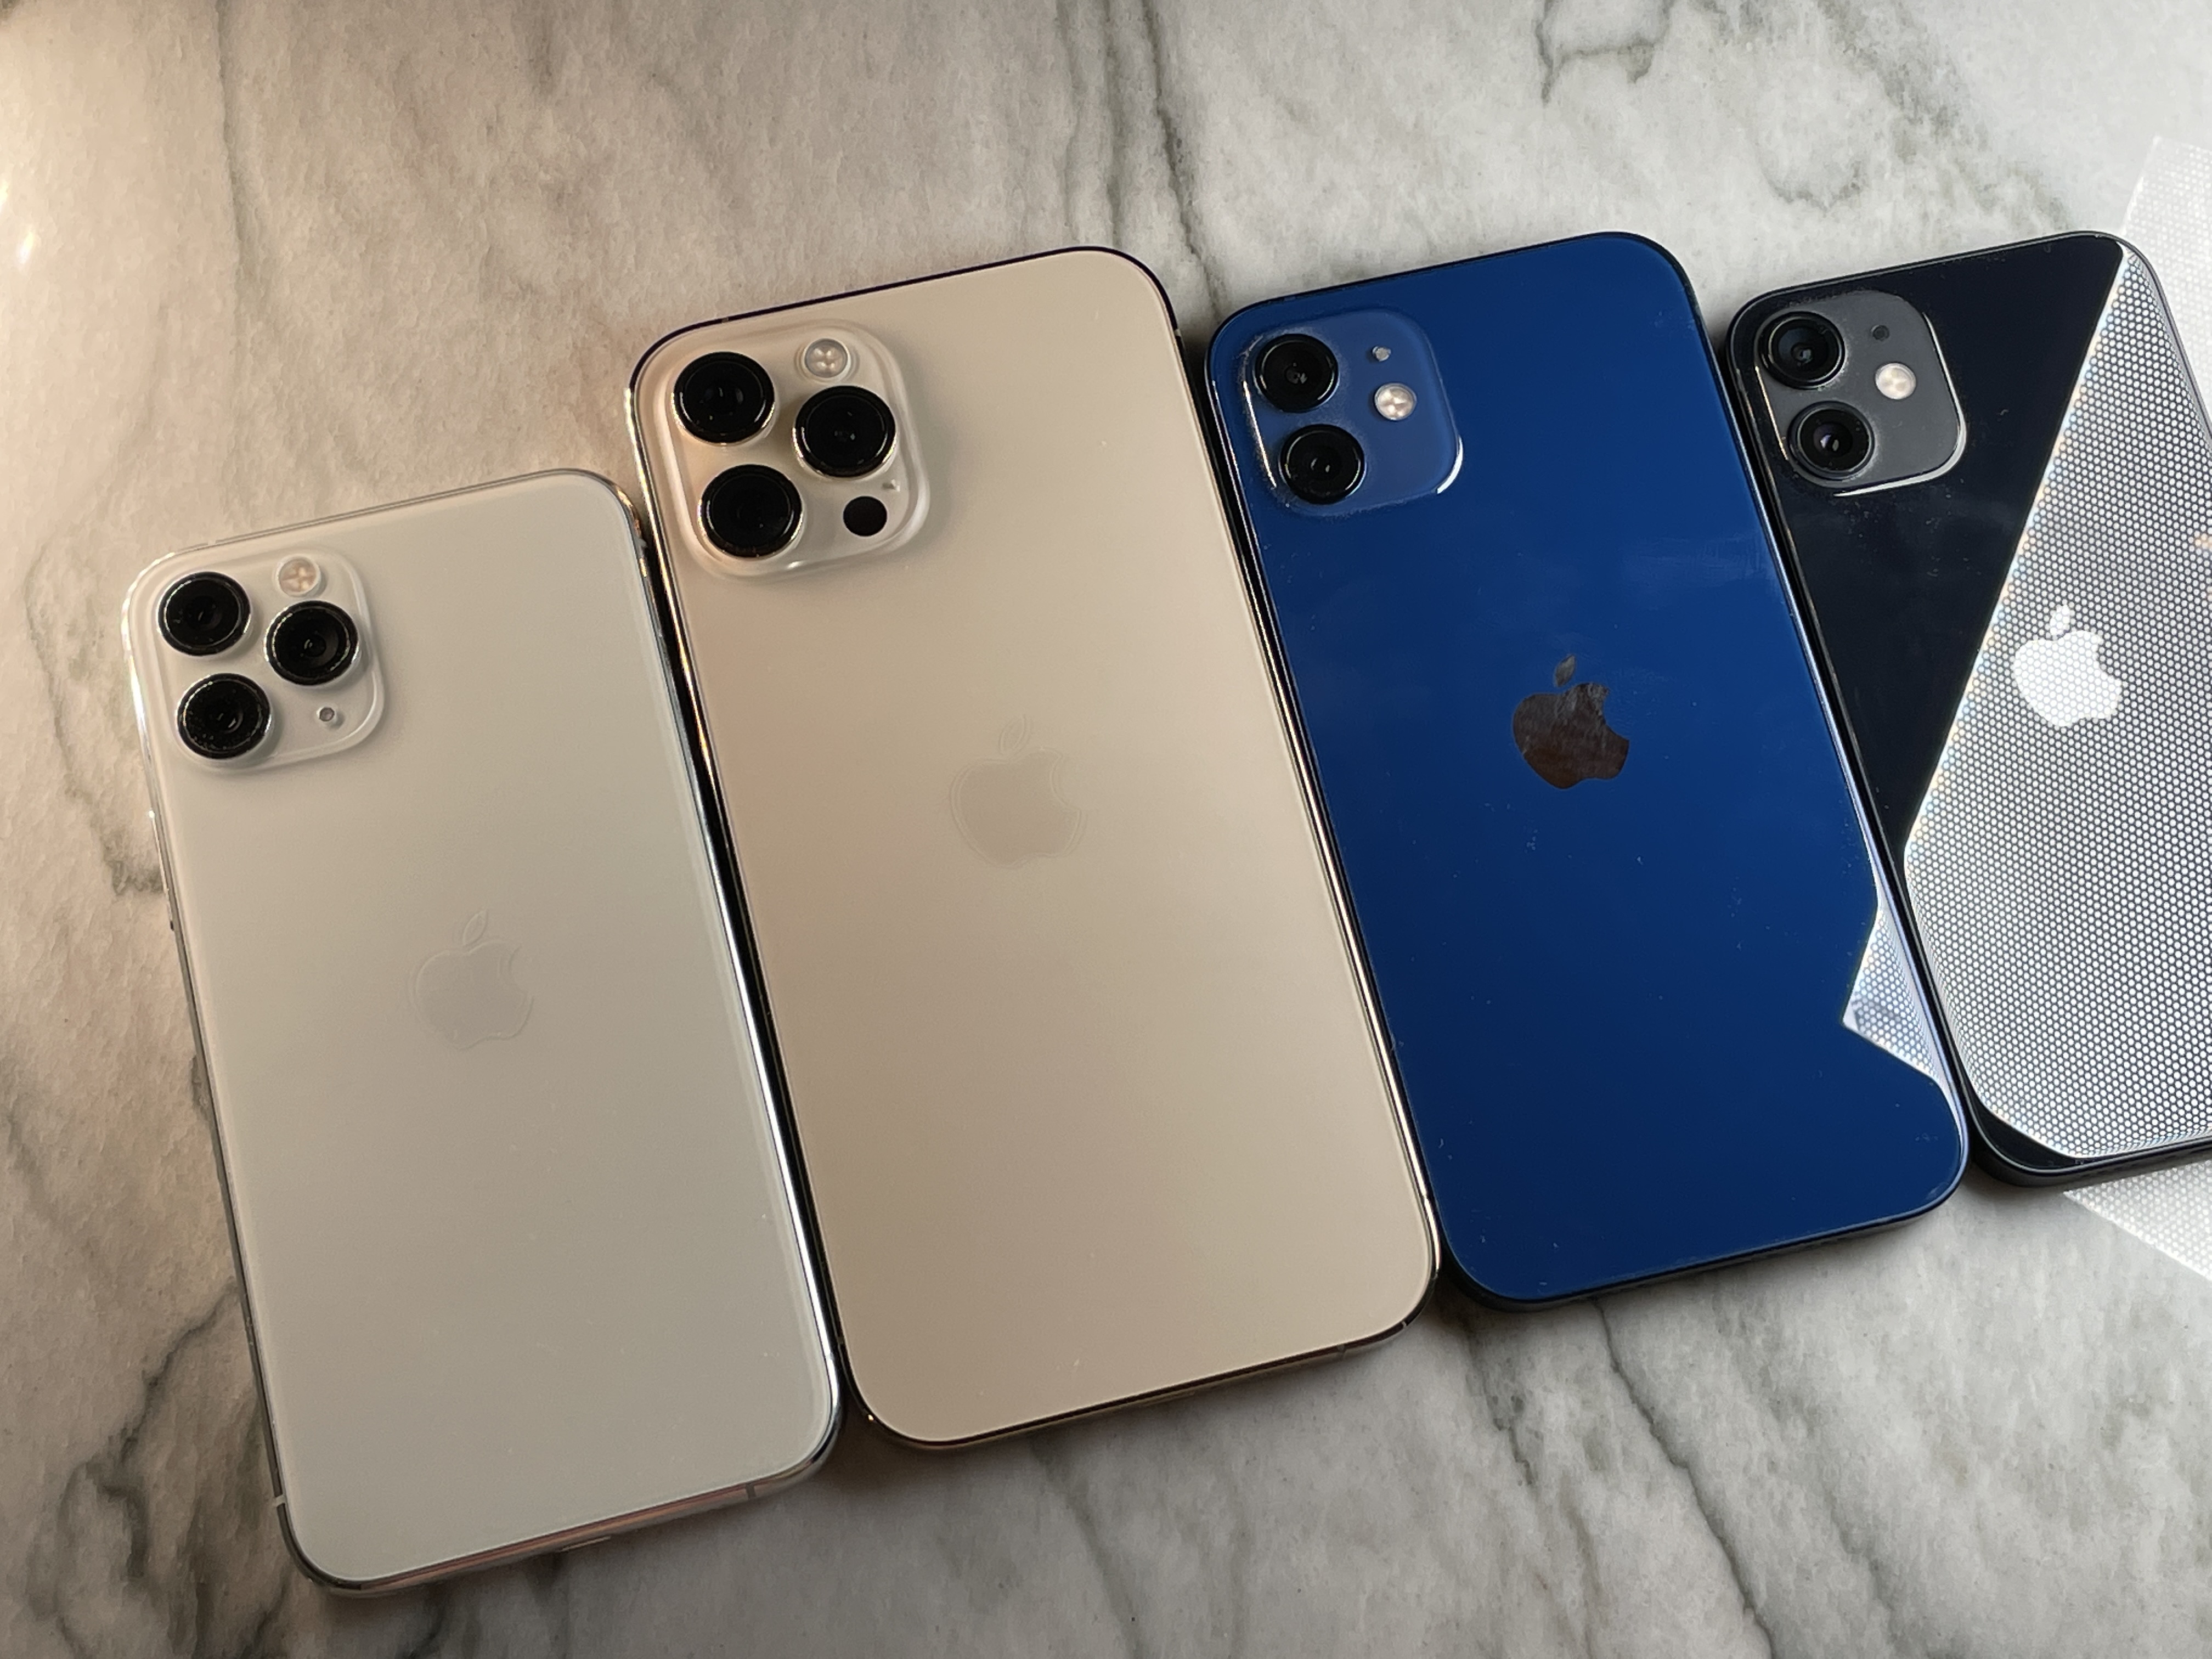 Review: The iPhone 12 Pro Max is worth its handling fee | TechCrunch